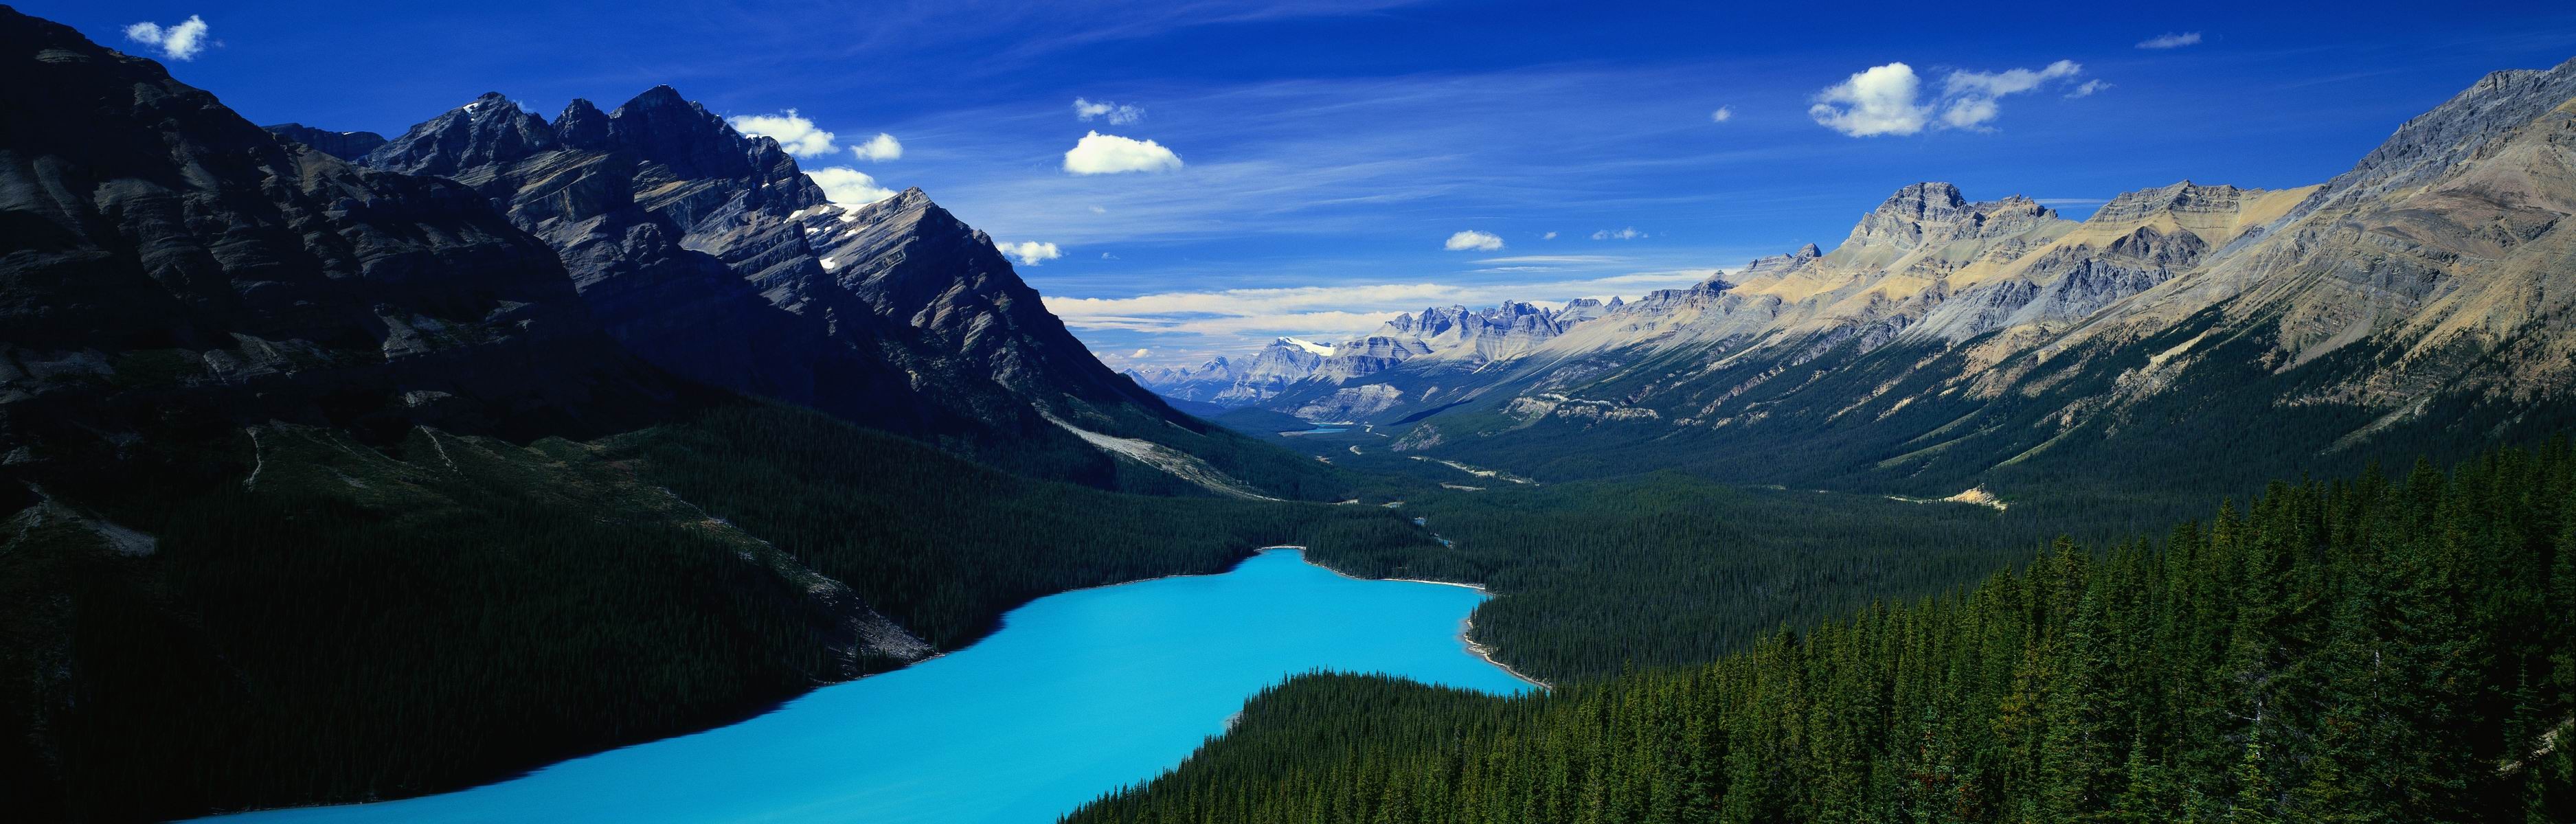 General 3750x1200 nature lake forest mountains landscape